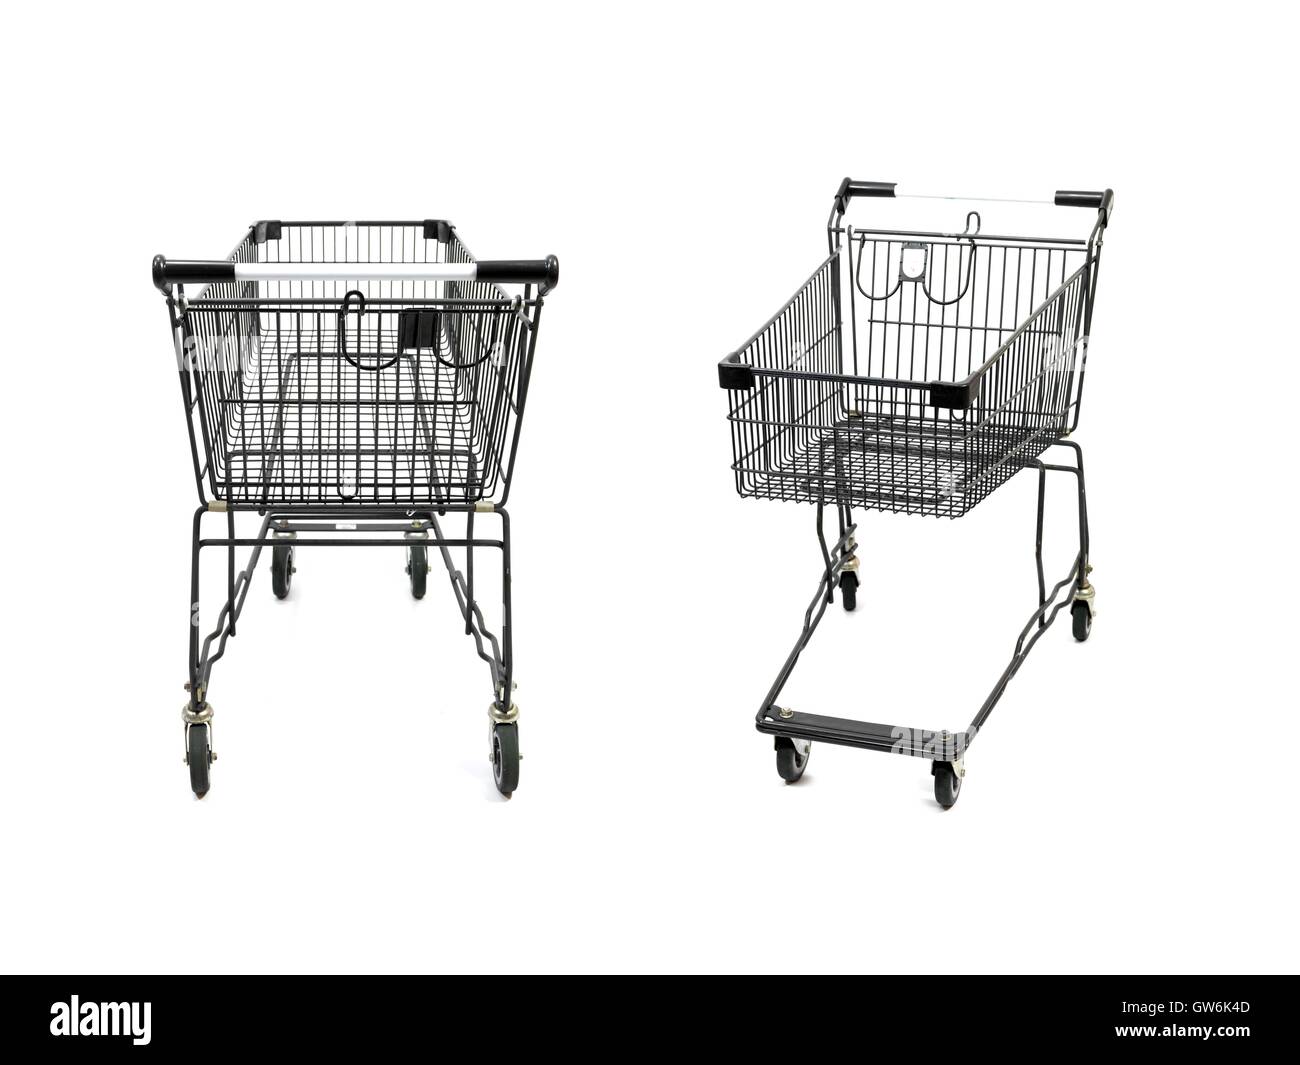 Shopping cart buggy Cut Out Stock Images & Pictures - Page 2 - Alamy